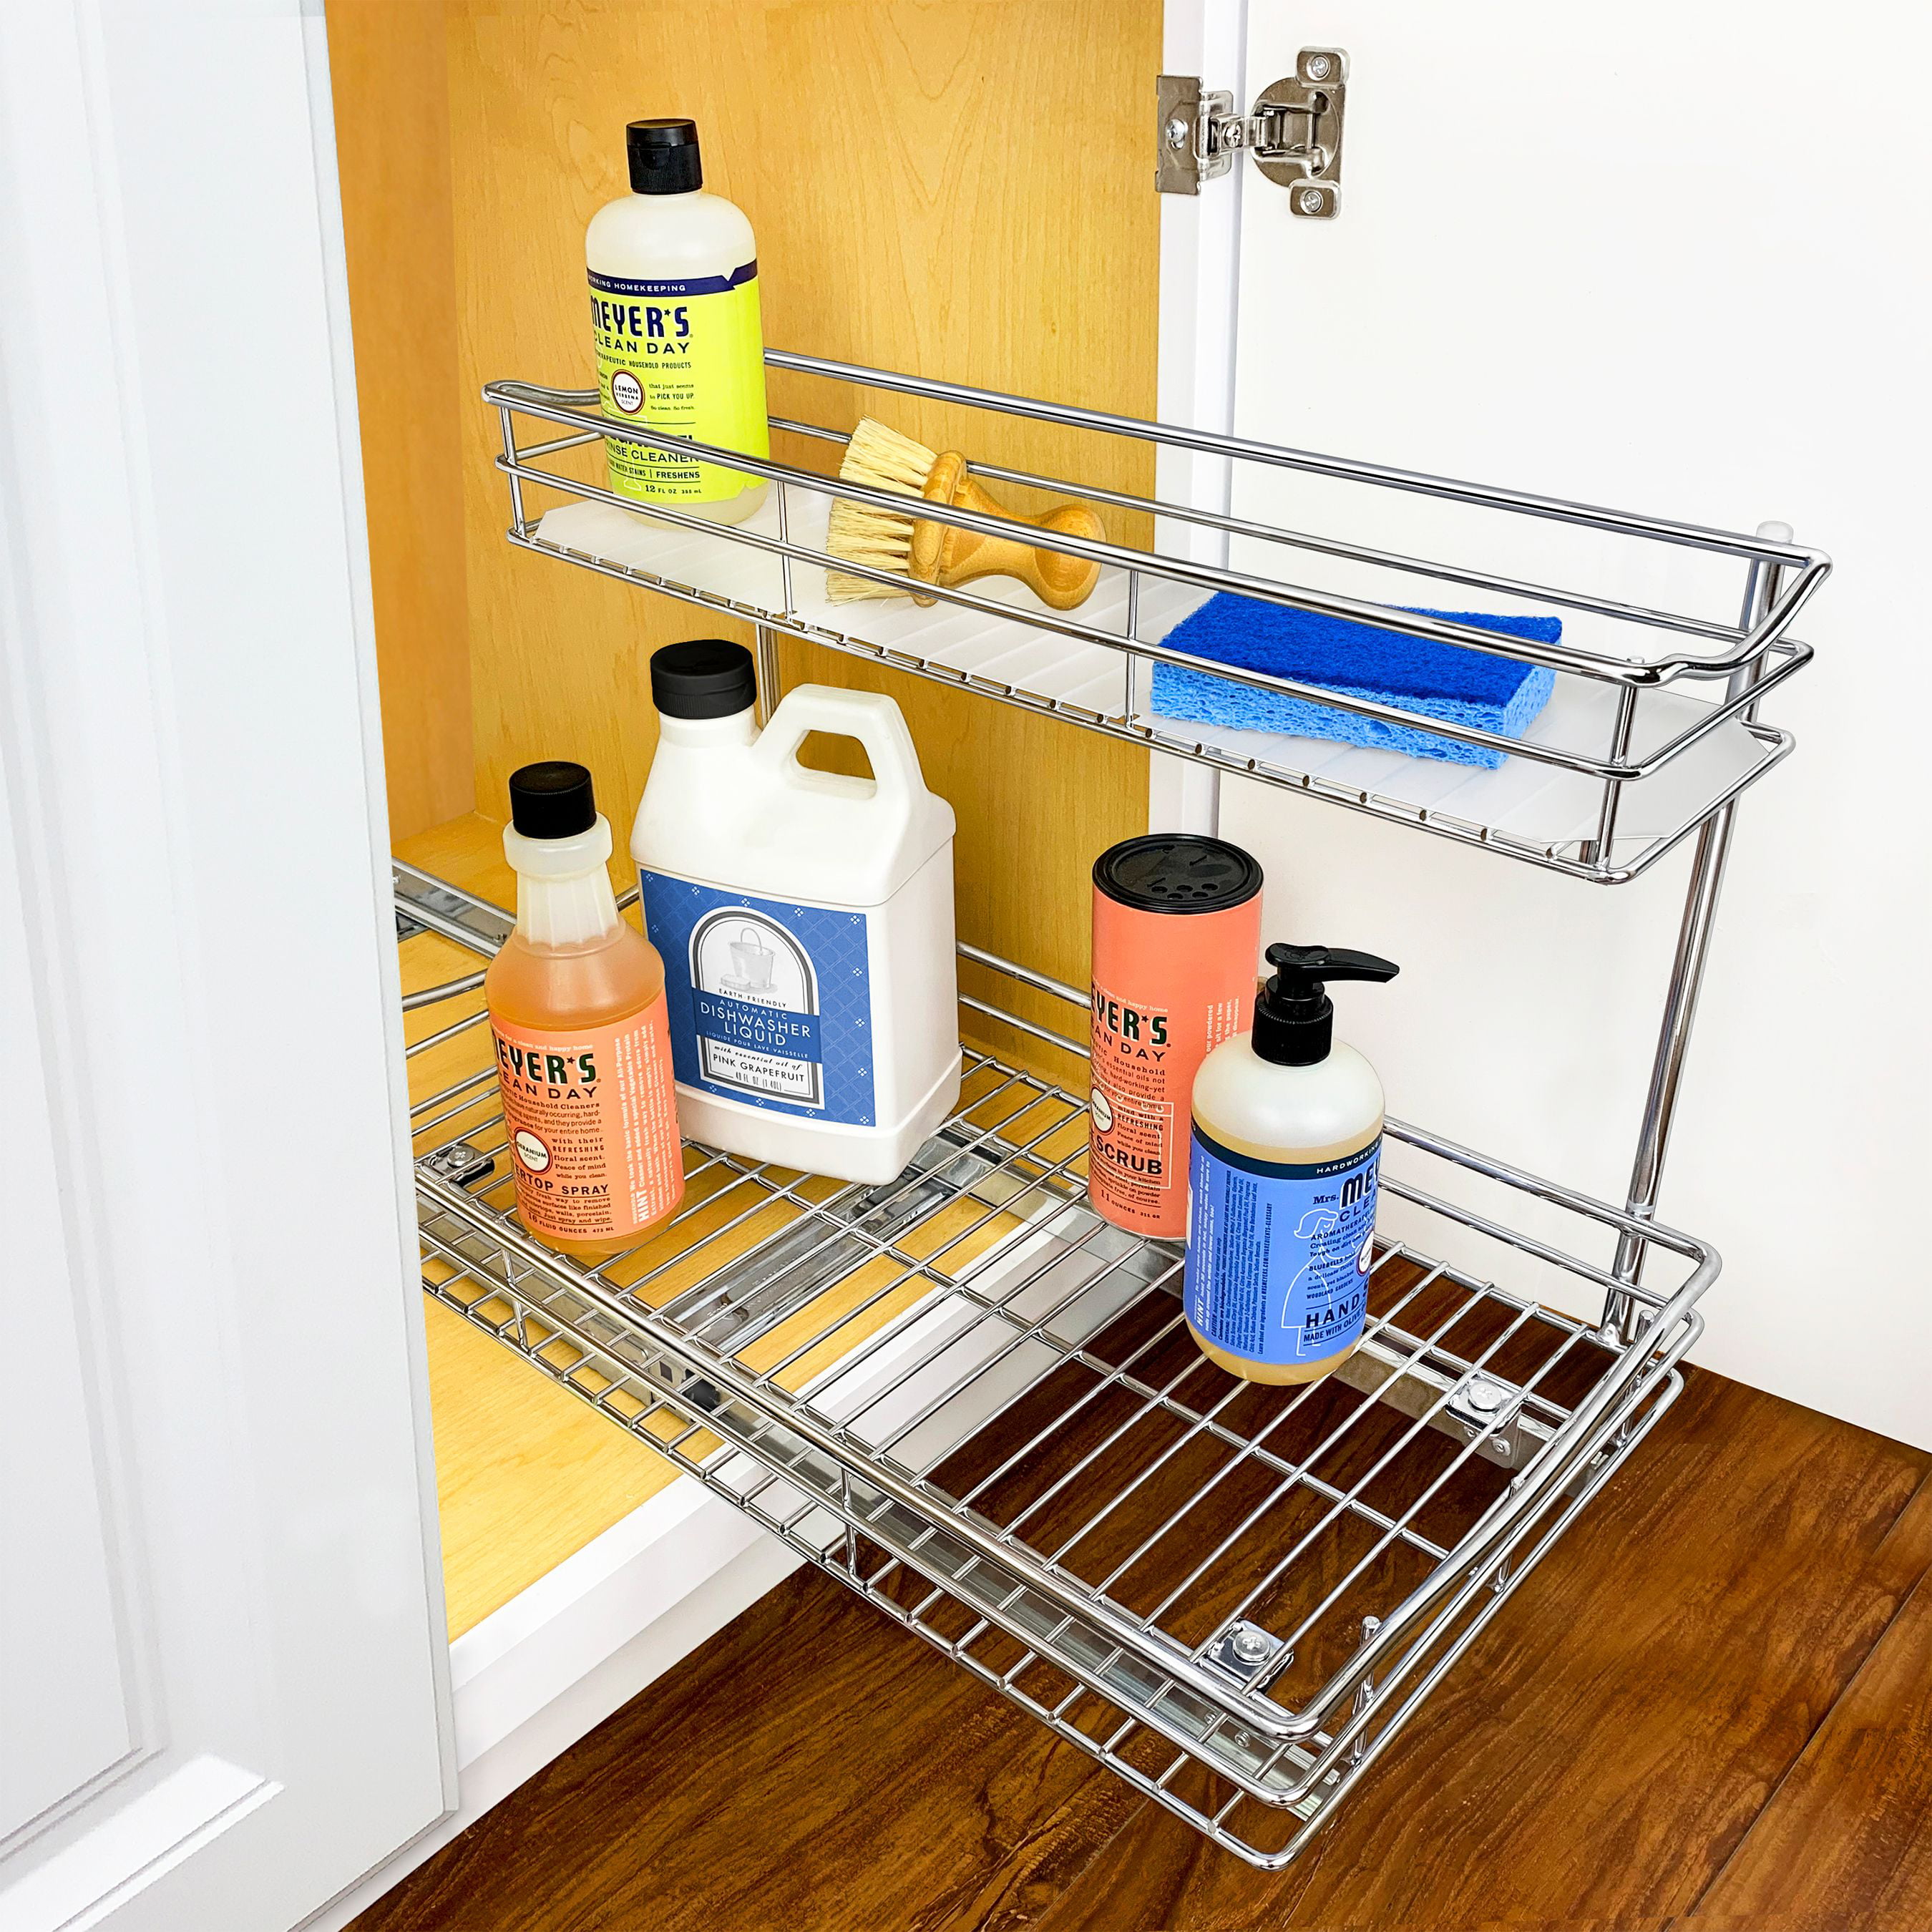 furihshe Under Sink Organizers and Storage, Pull Out Cabinet Organizer 2-Tier Slide Out Sliding Shelf Under Cabinet Storage Multi-Use for Under